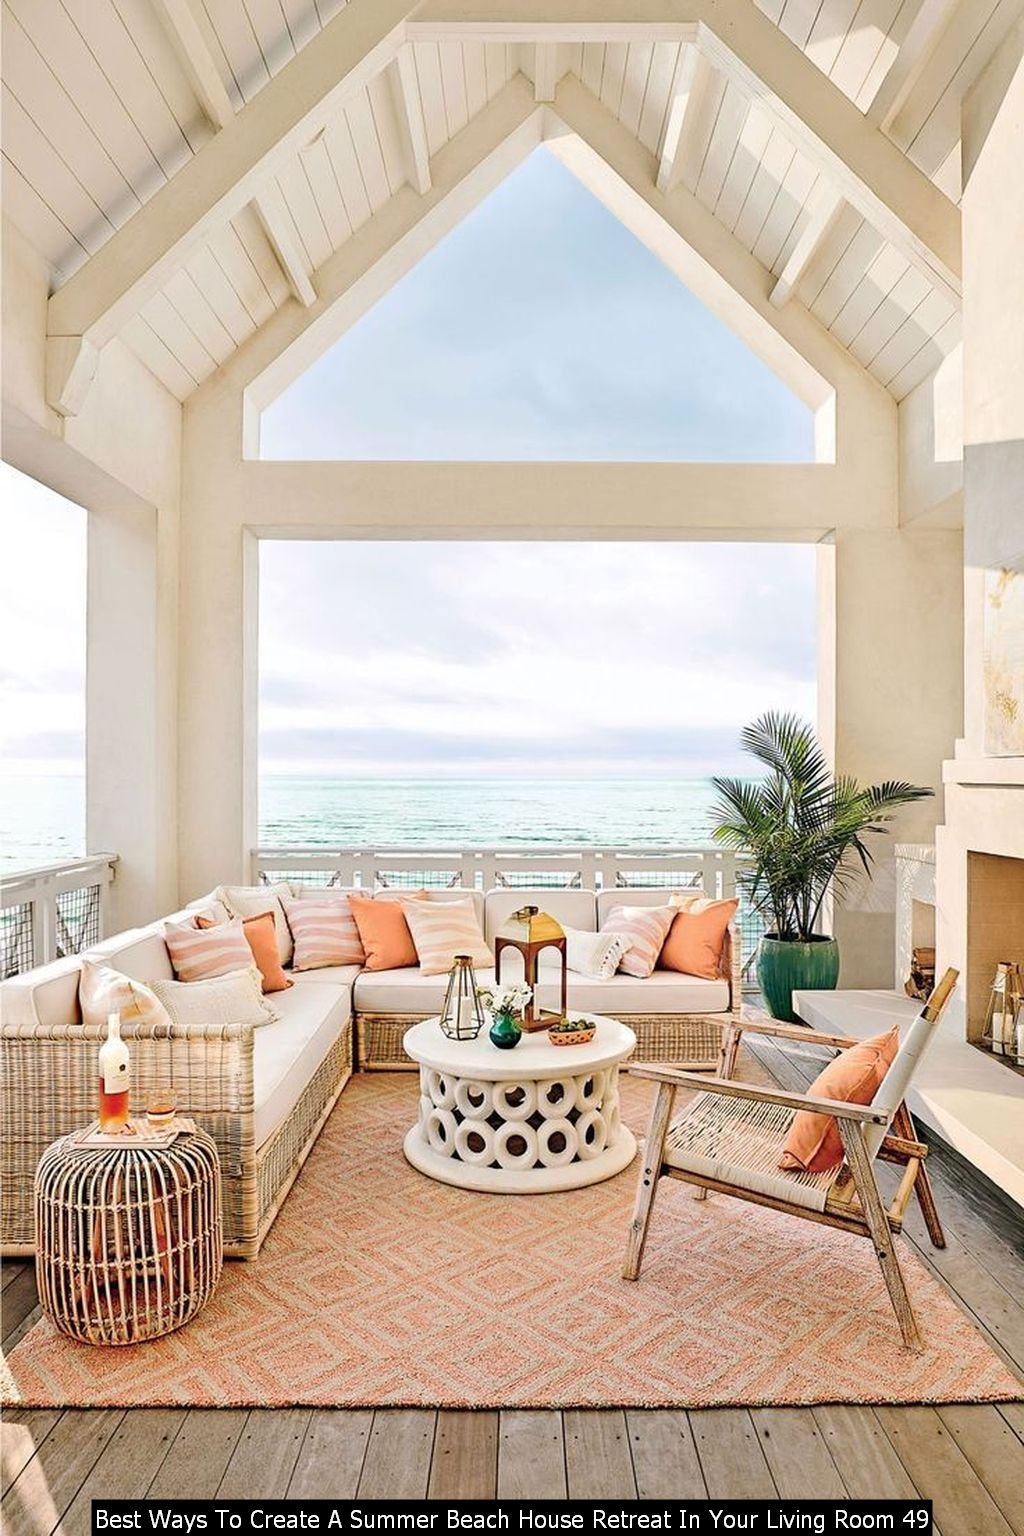 Best Ways To Create A Summer Beach House Retreat In Your Living Room 49